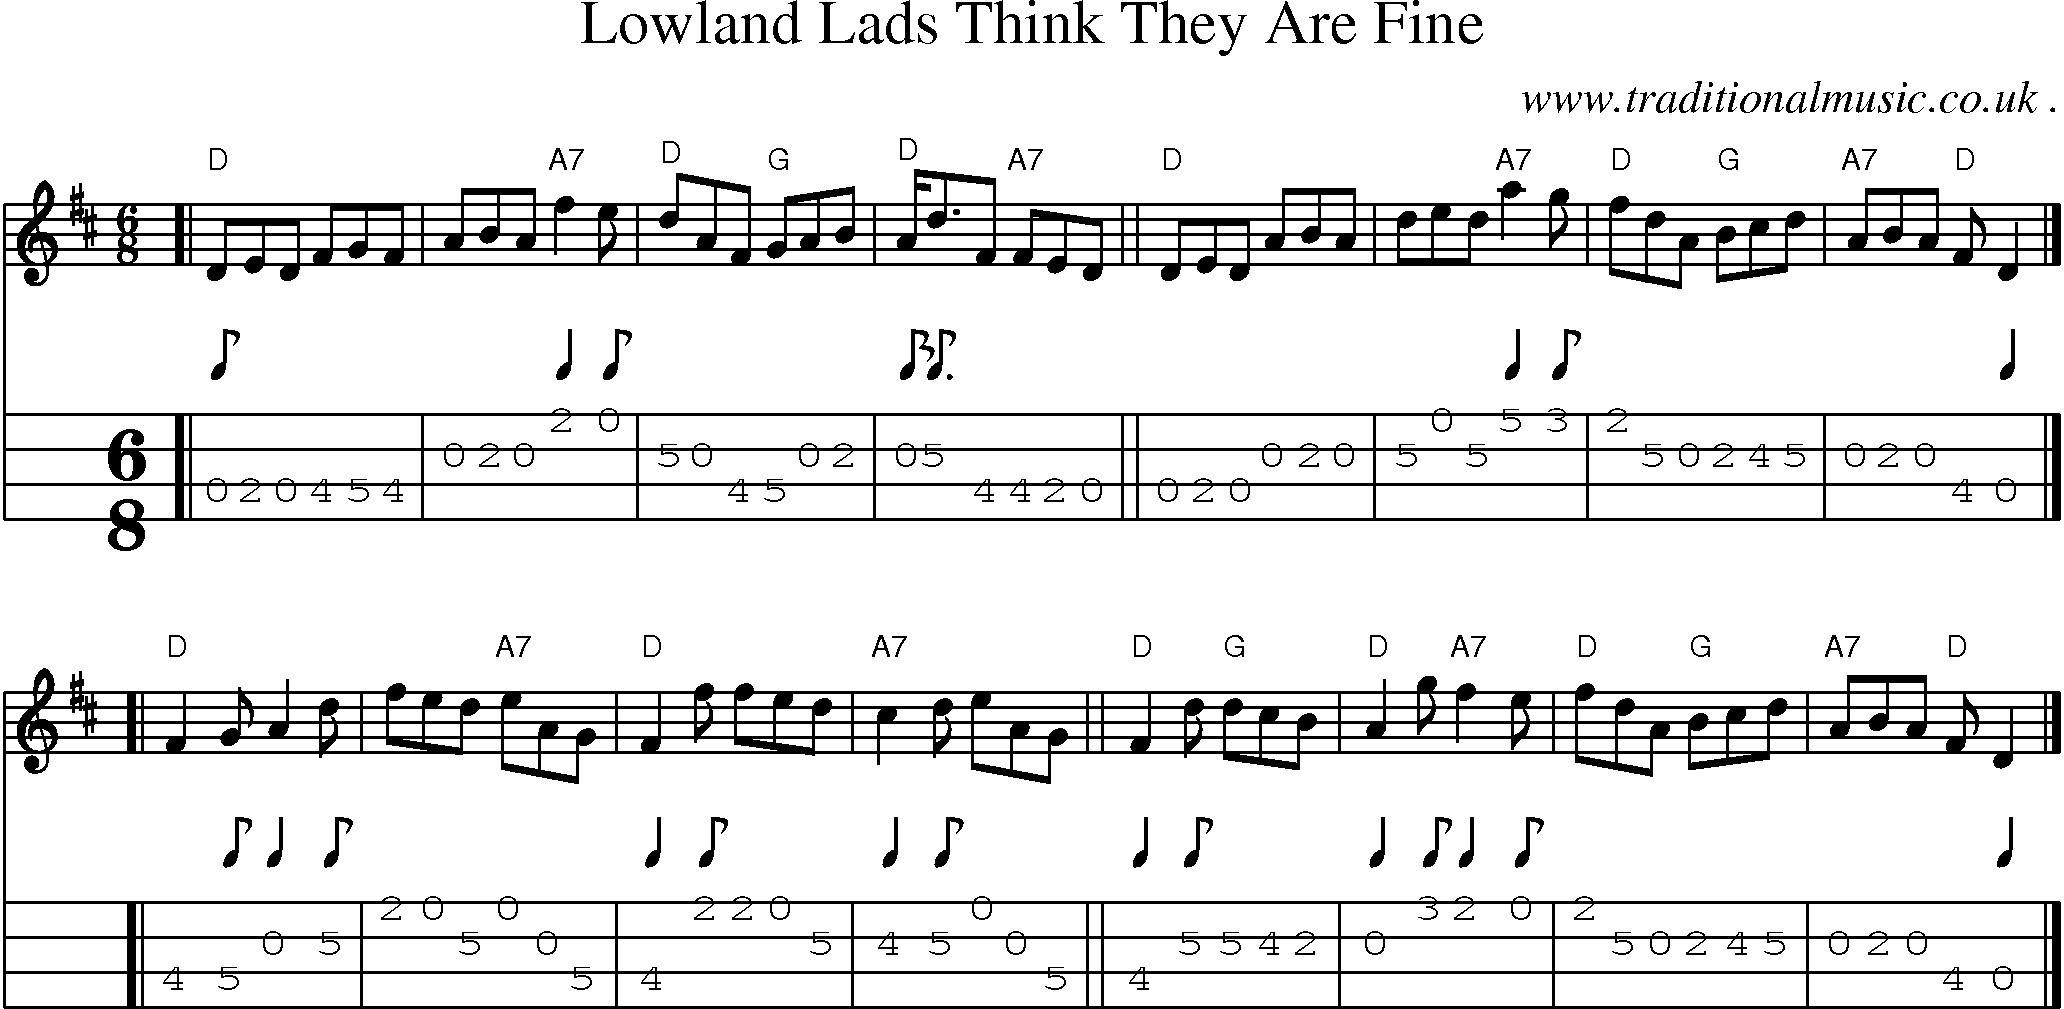 Sheet-music  score, Chords and Mandolin Tabs for Lowland Lads Think They Are Fine